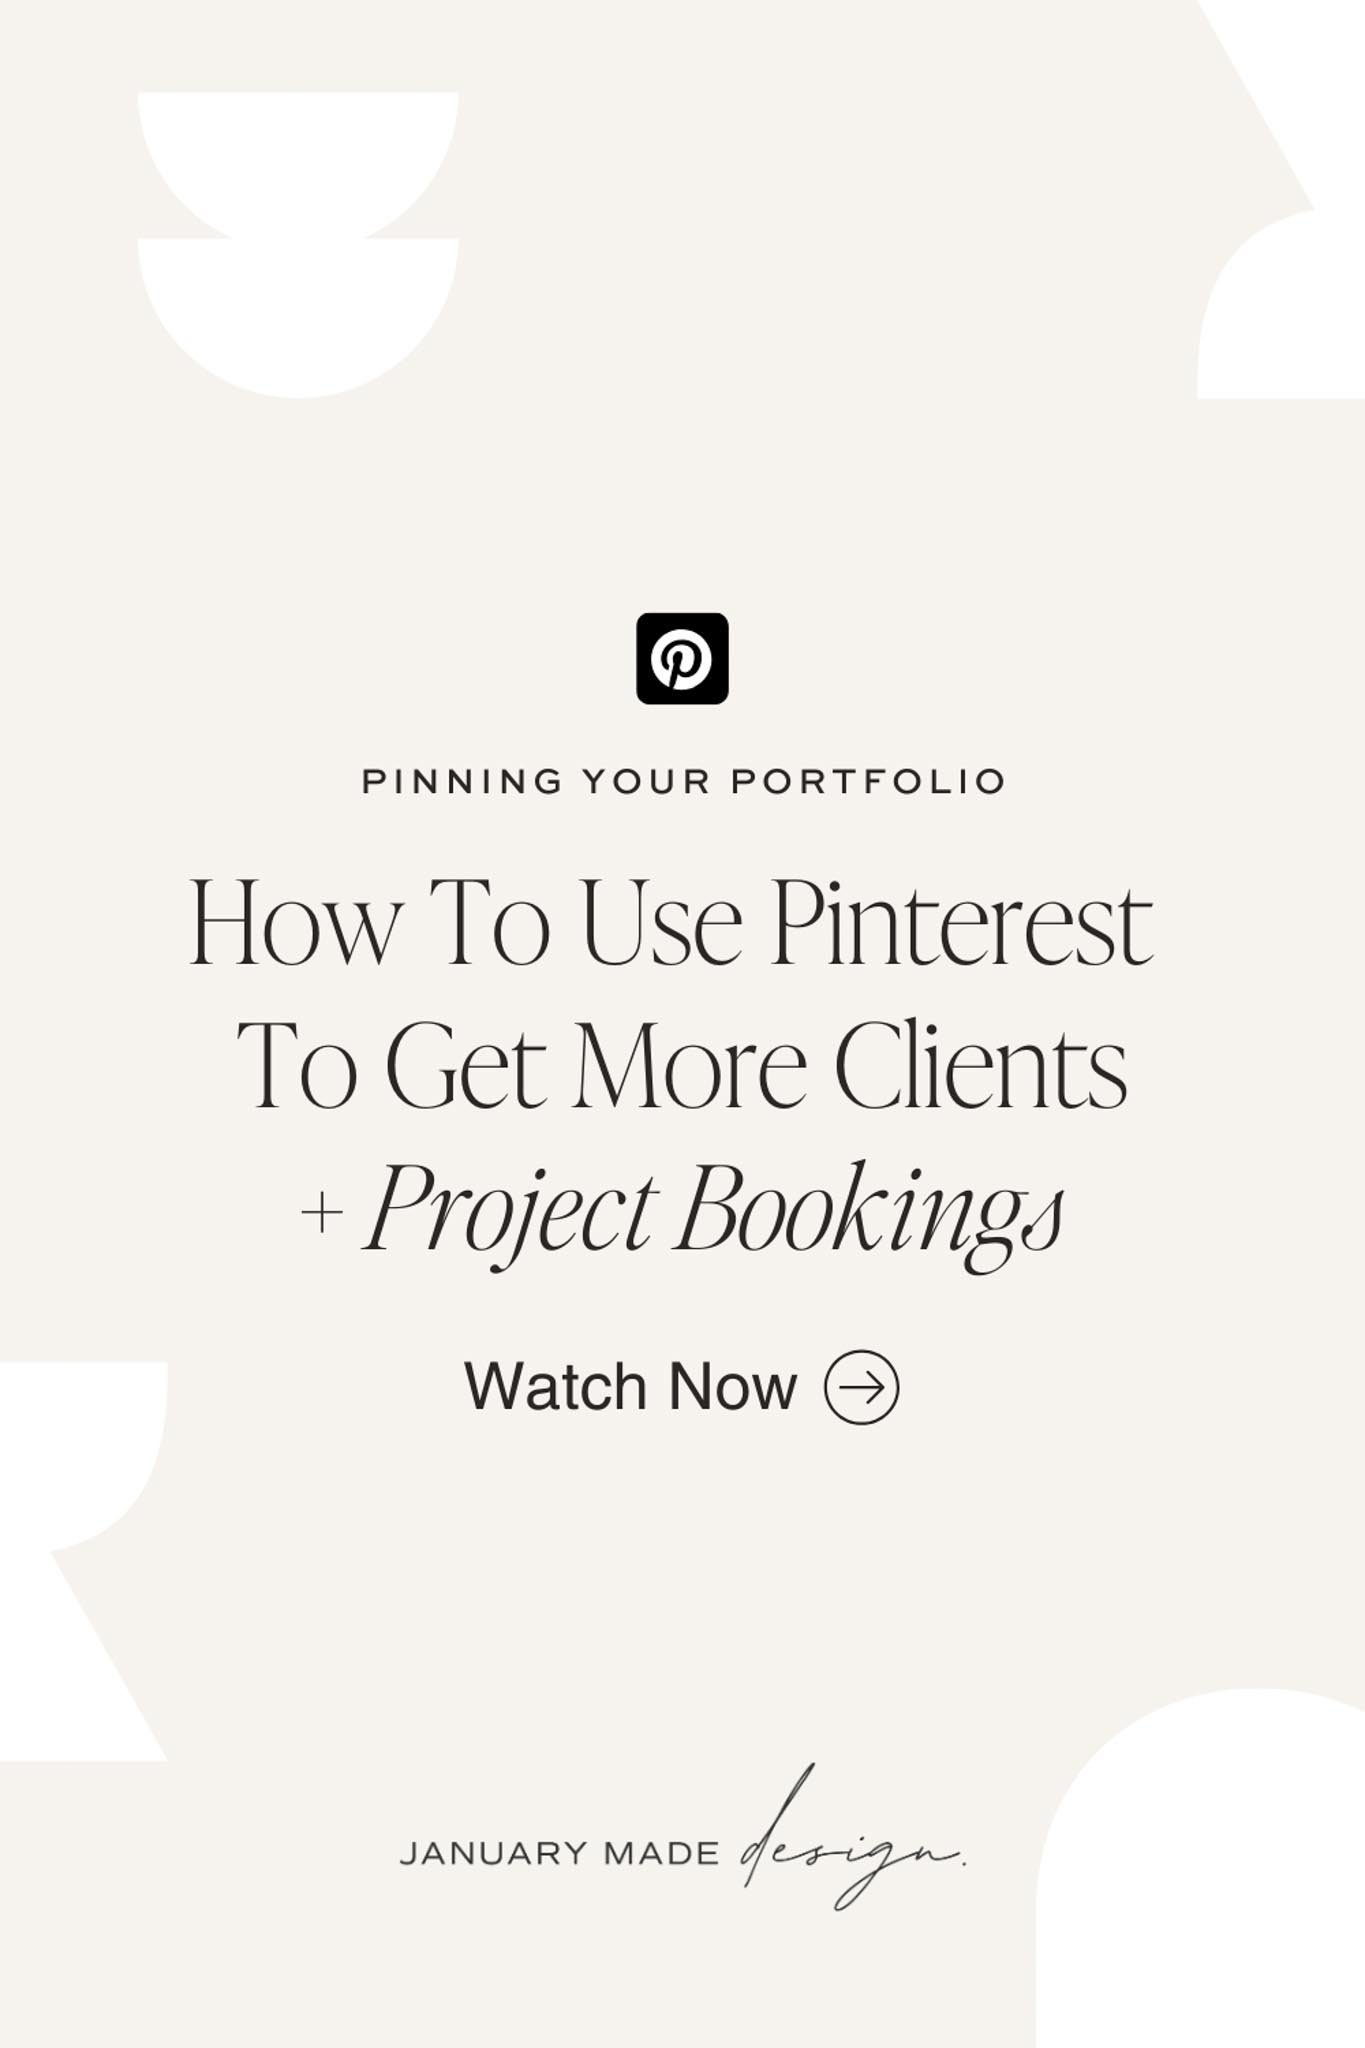 Pinning Your Portfolio_ How To Use Pinterest To Get More Clients & Project Bookings-11.jpg